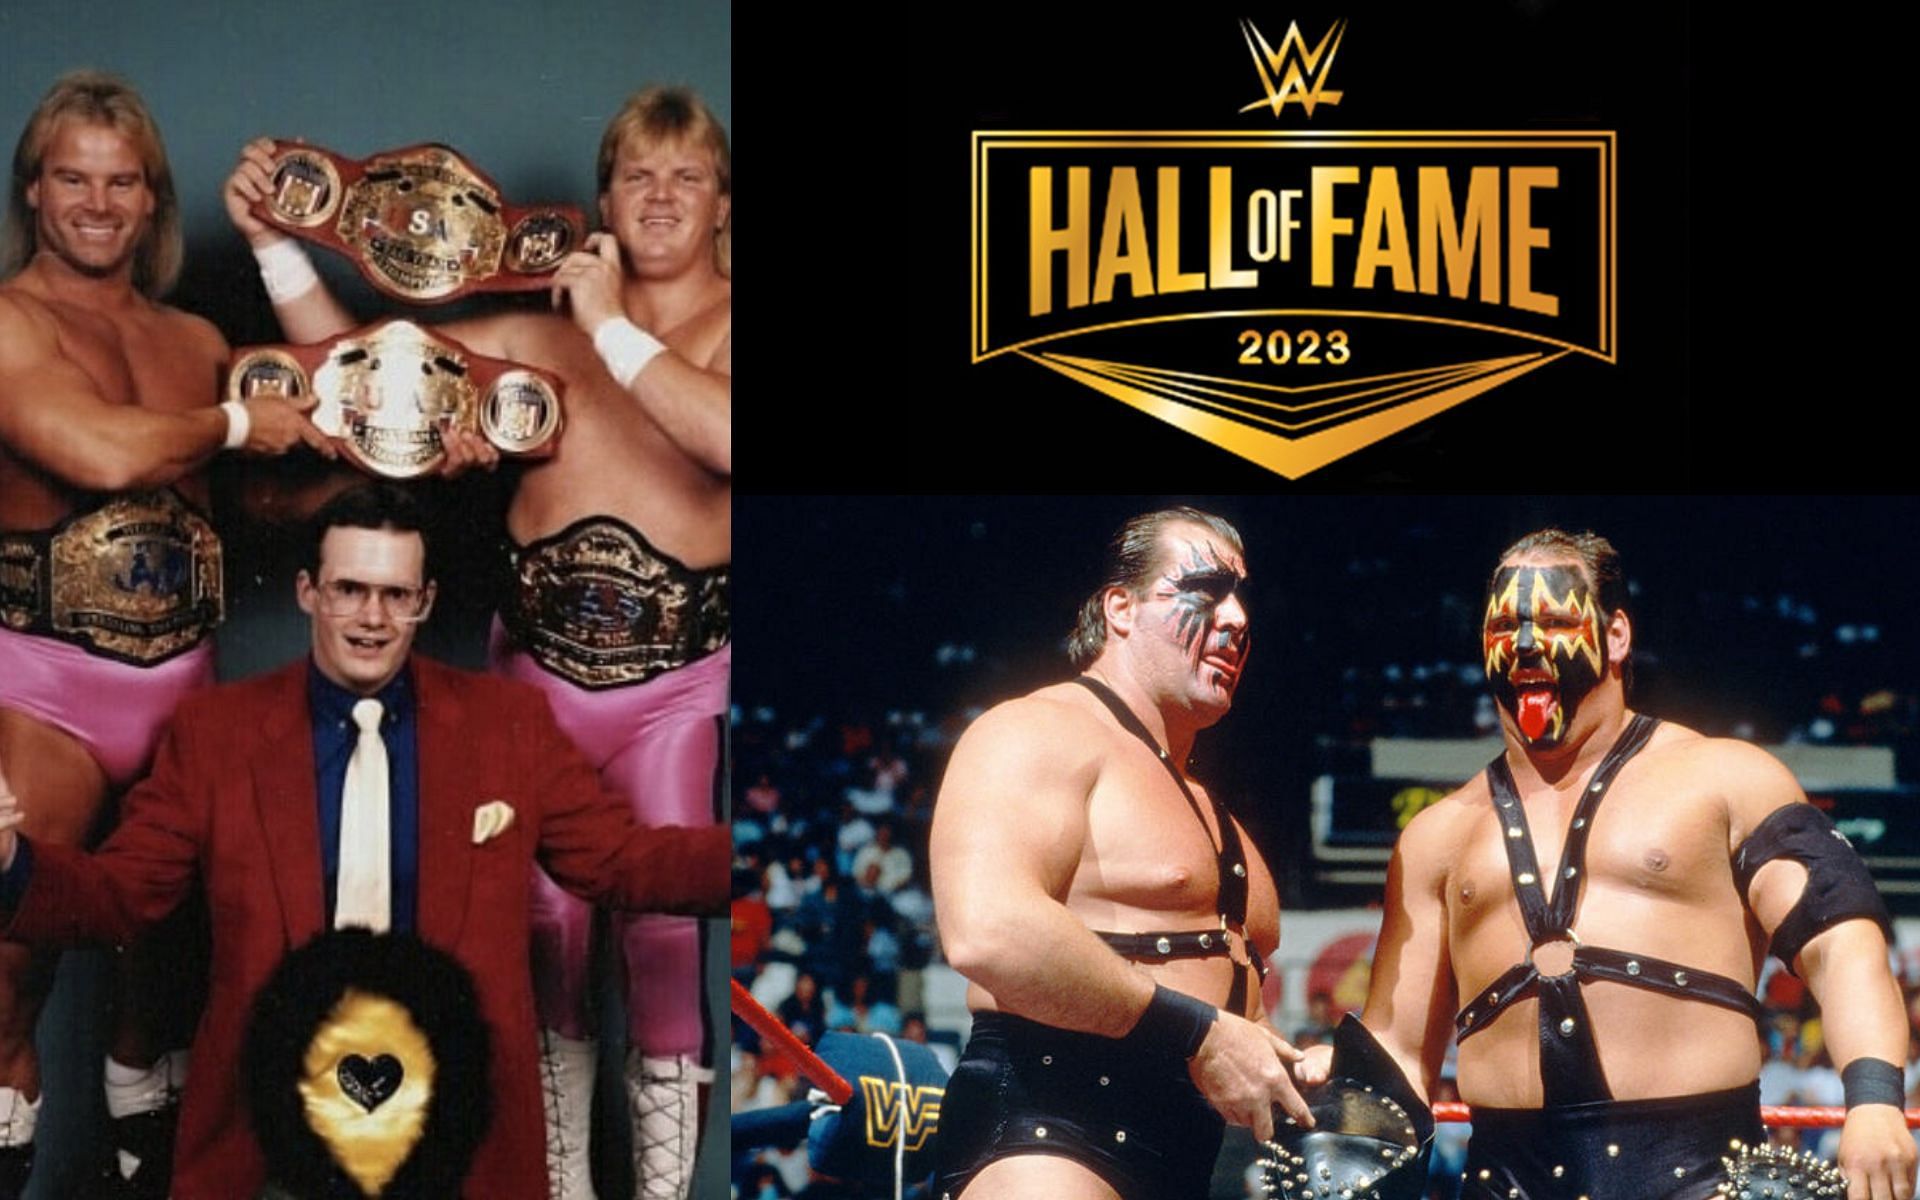 Demolition and The Midnight Express should be in the WWE HOF immediately!